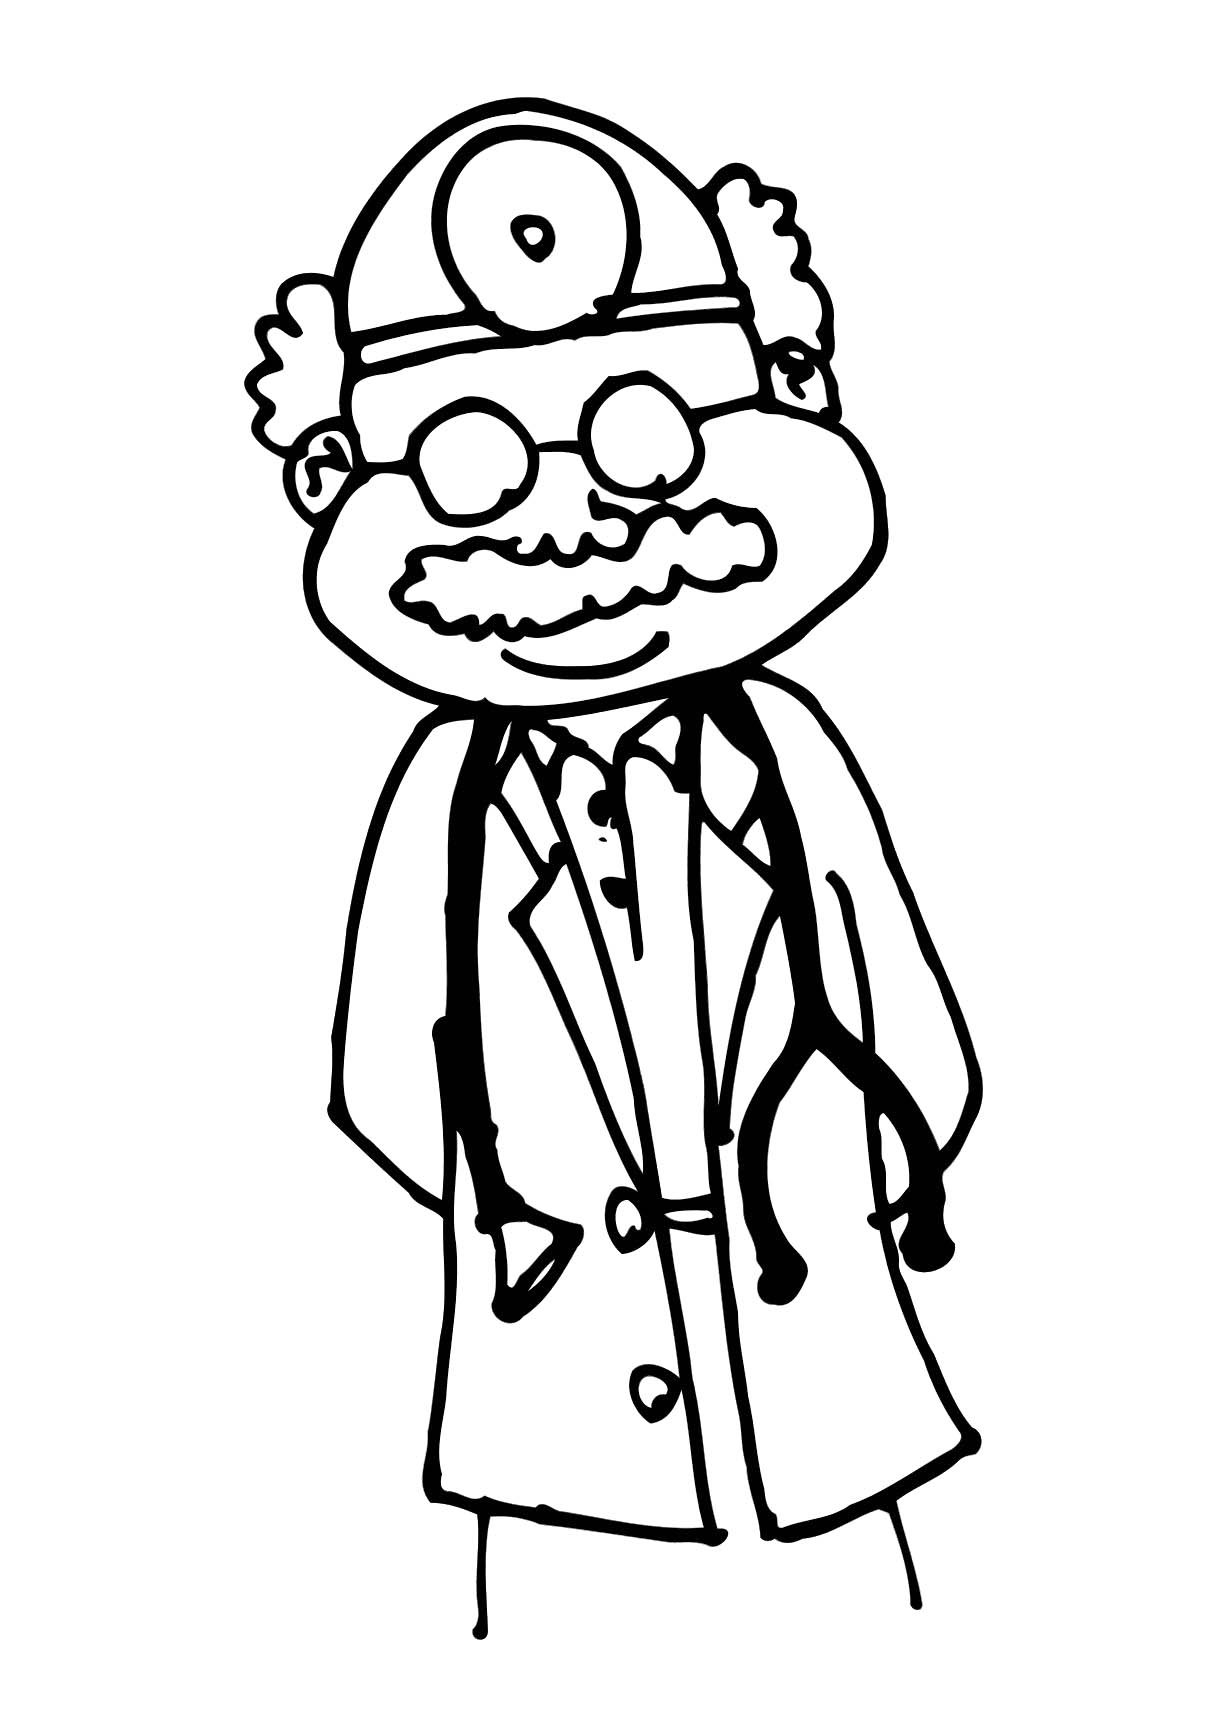 Colouring Pictures Of Doctors - ClipArt Best